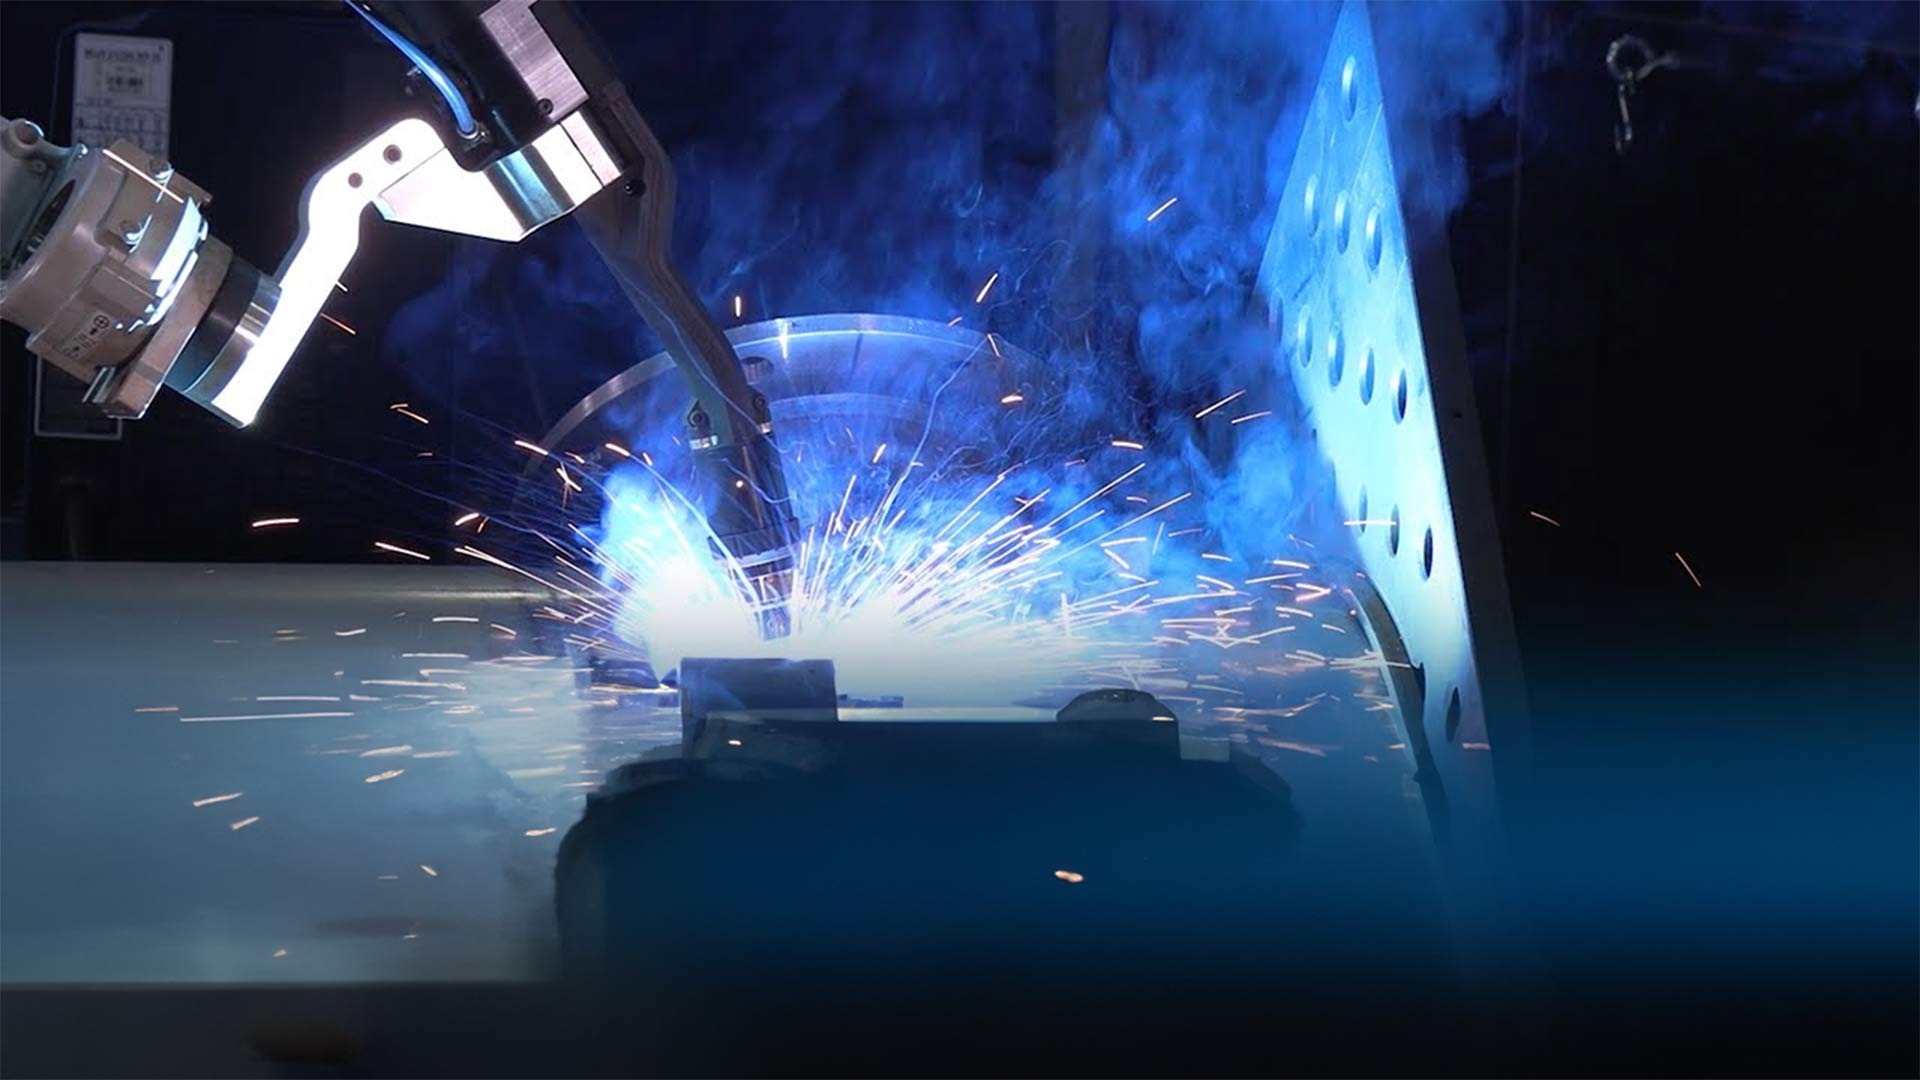 The Hercules automated MIG welding system